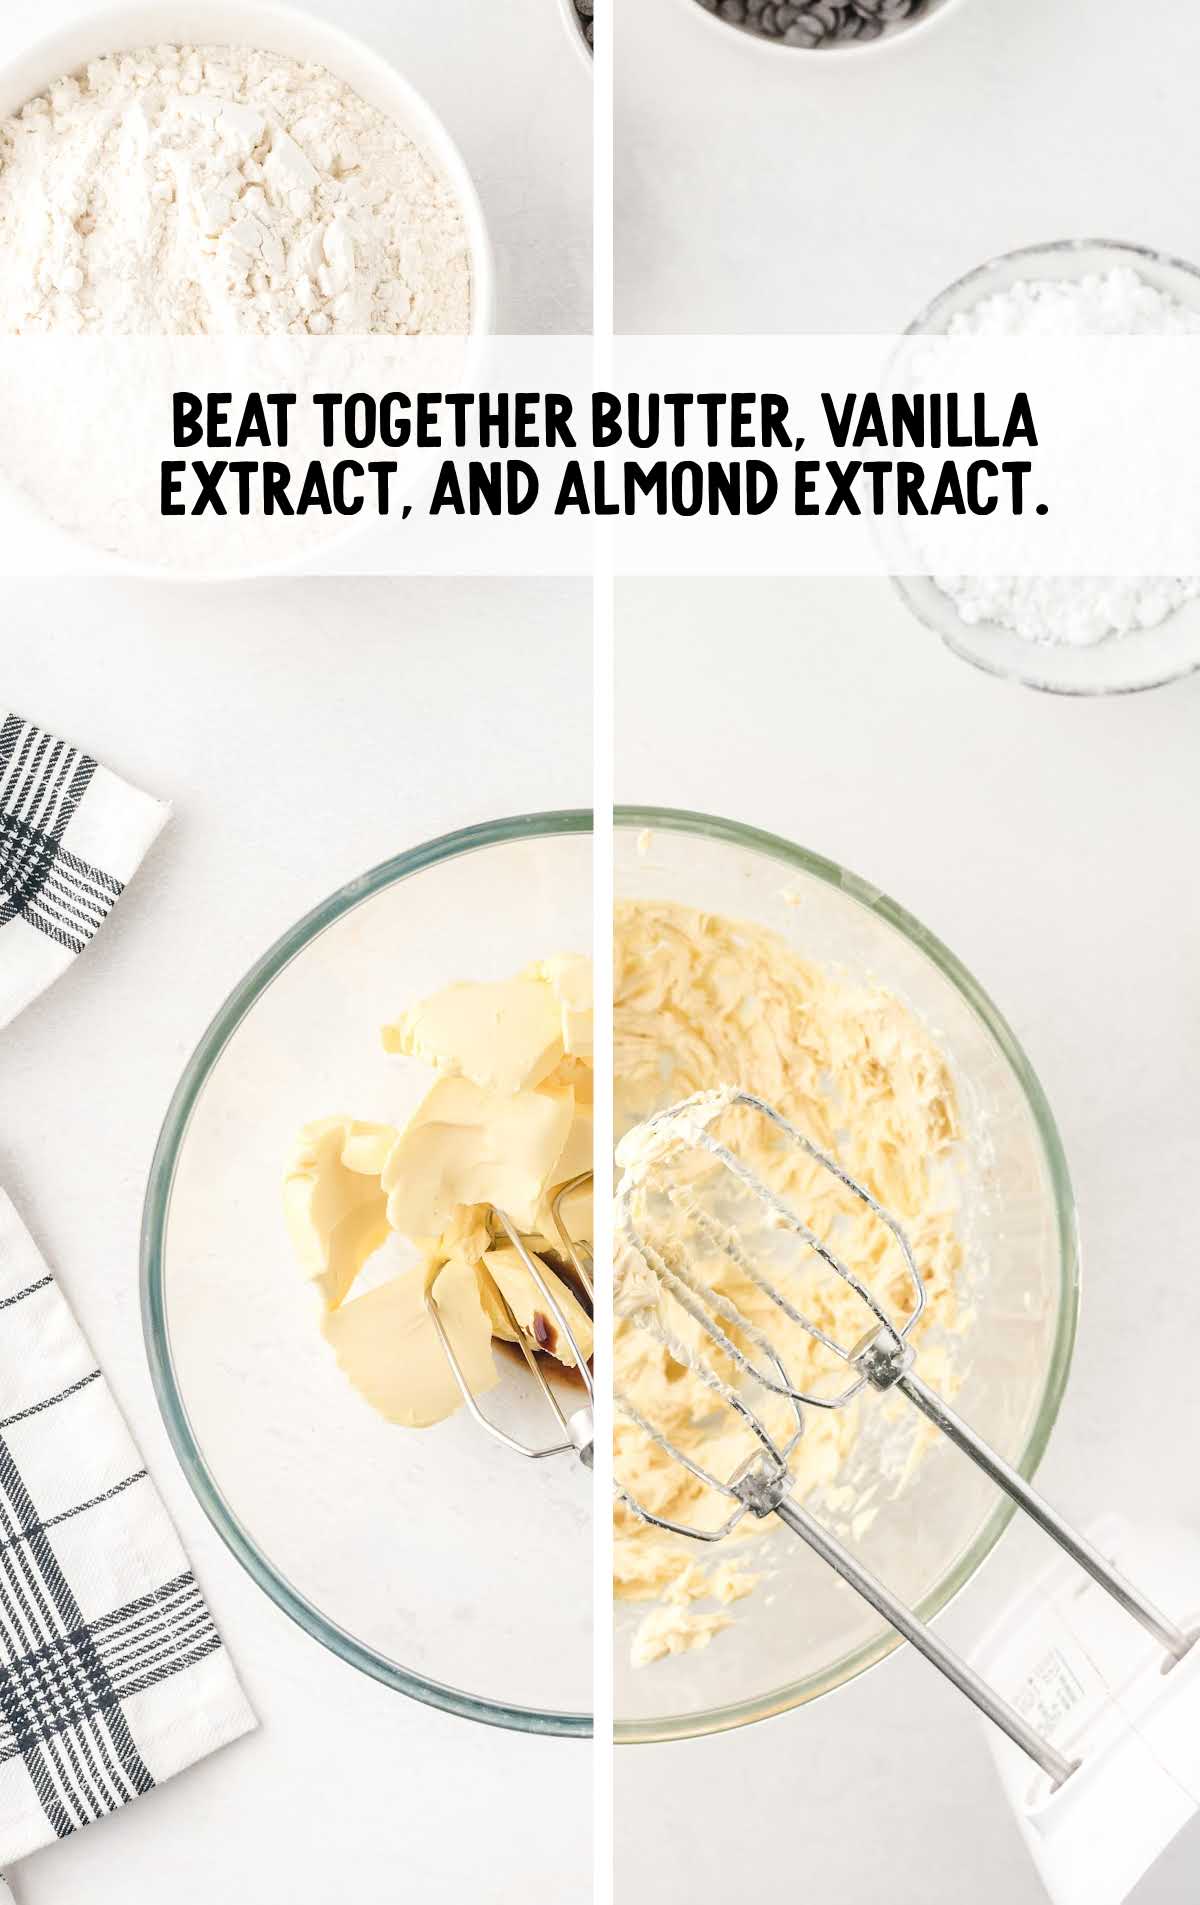 butter, vanilla extract, and almond extract blended together